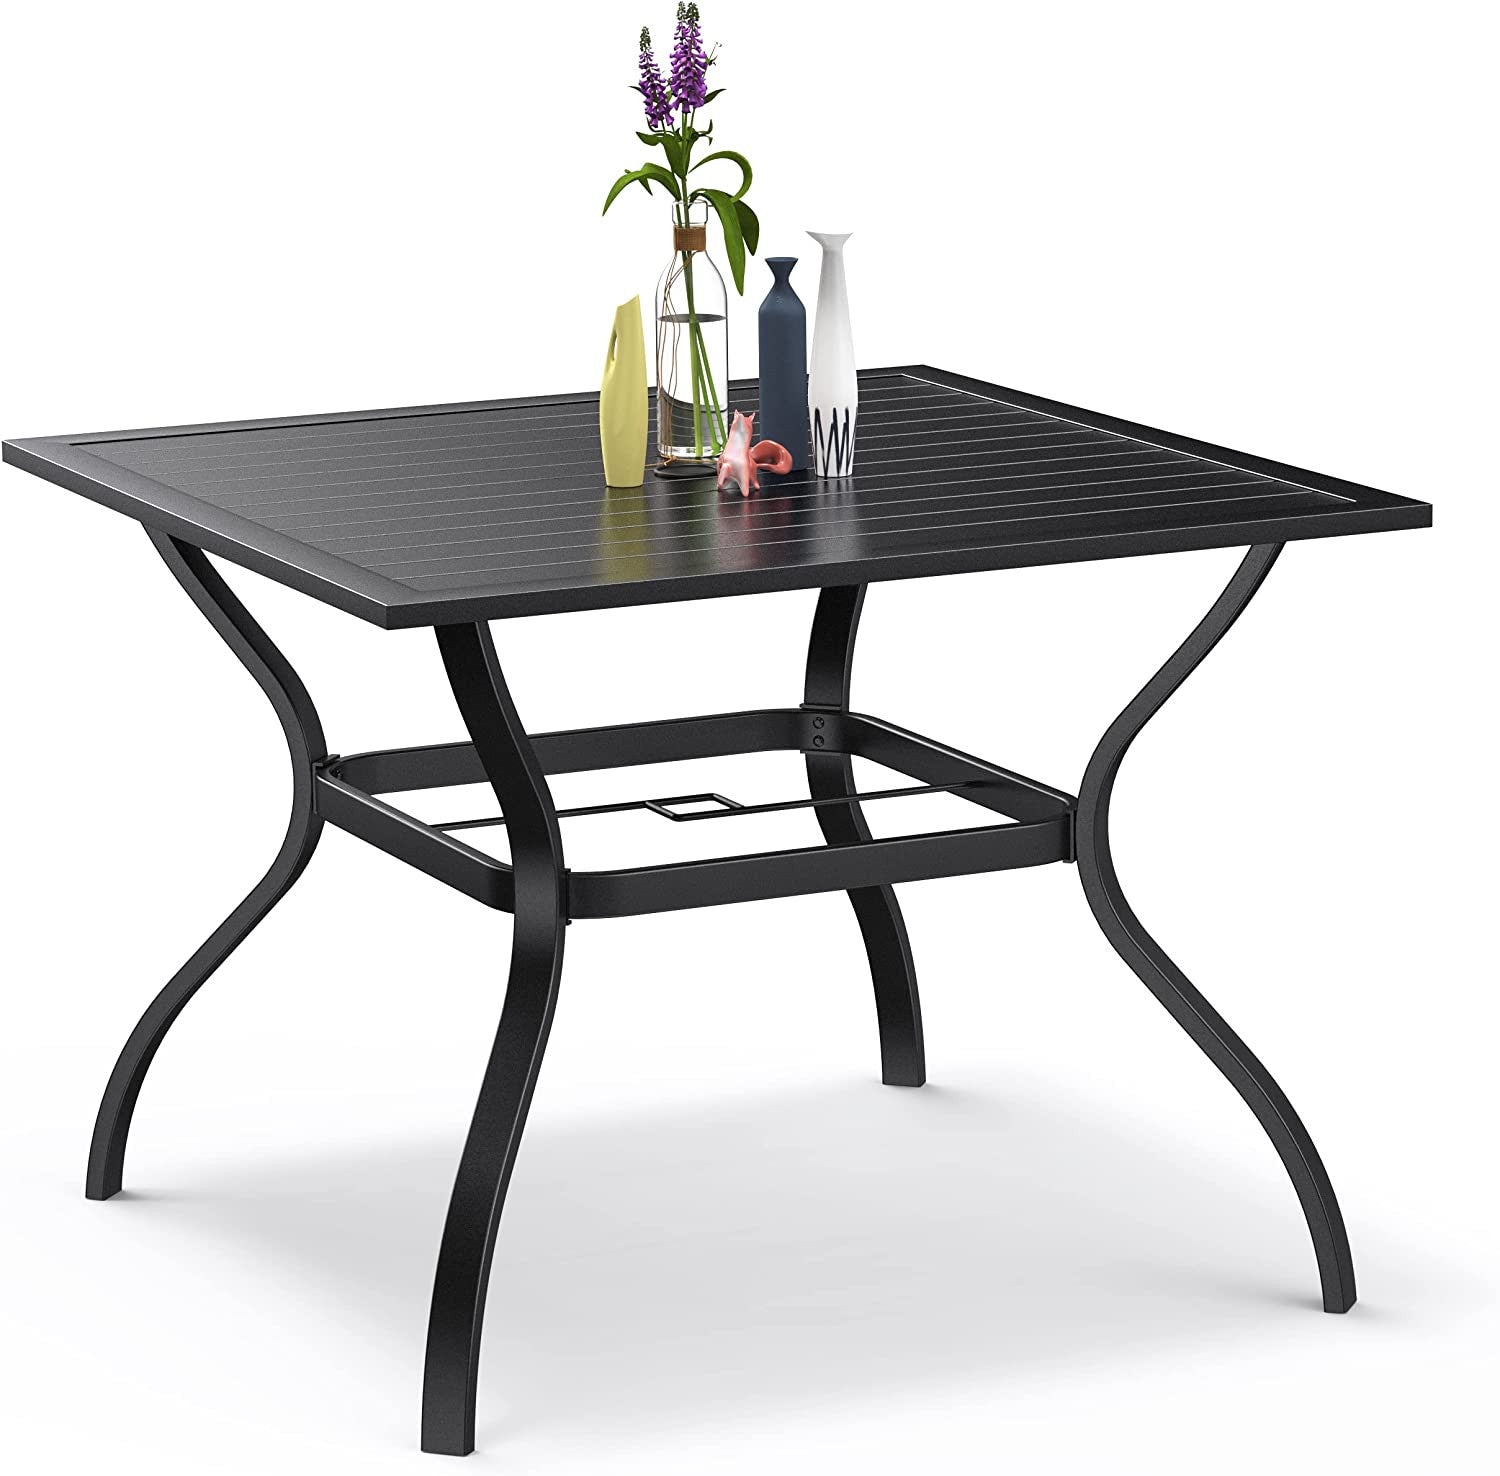 37" Black Square Metal Outdoor Dining Table with Umbrella Hole